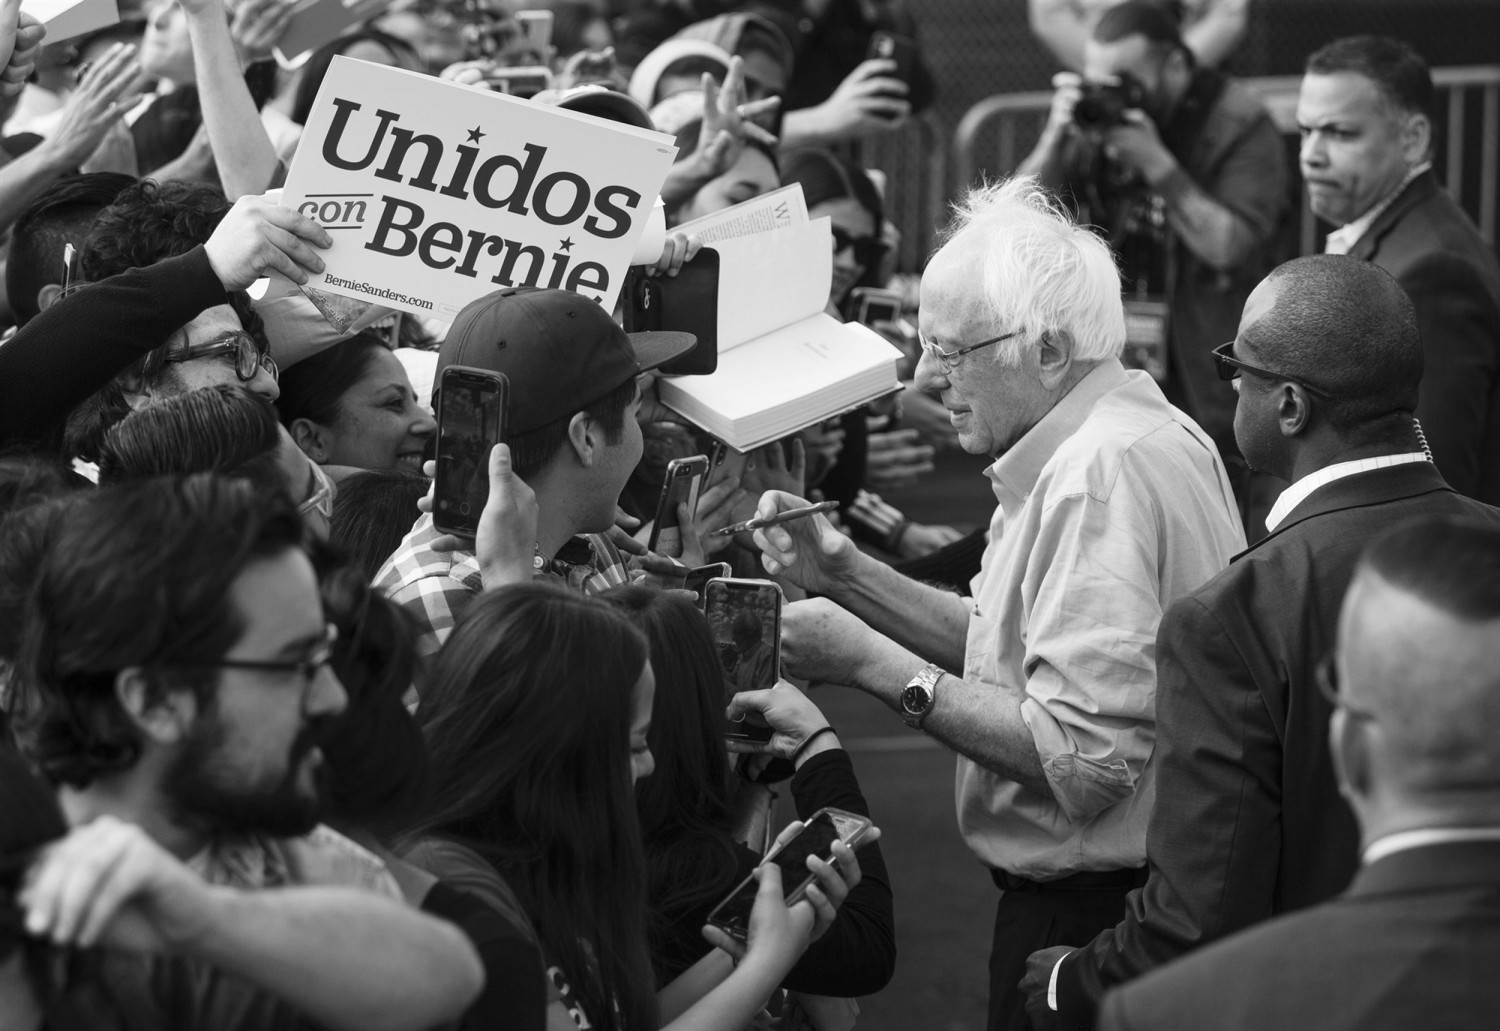 Sen. Bernie Sanders, I-Vt., signs autographs for Latino supporters at a campaign event at Valley High School in Santa Ana, Calif., on Feb. 21, 2020.Damian Dovarganes / AP